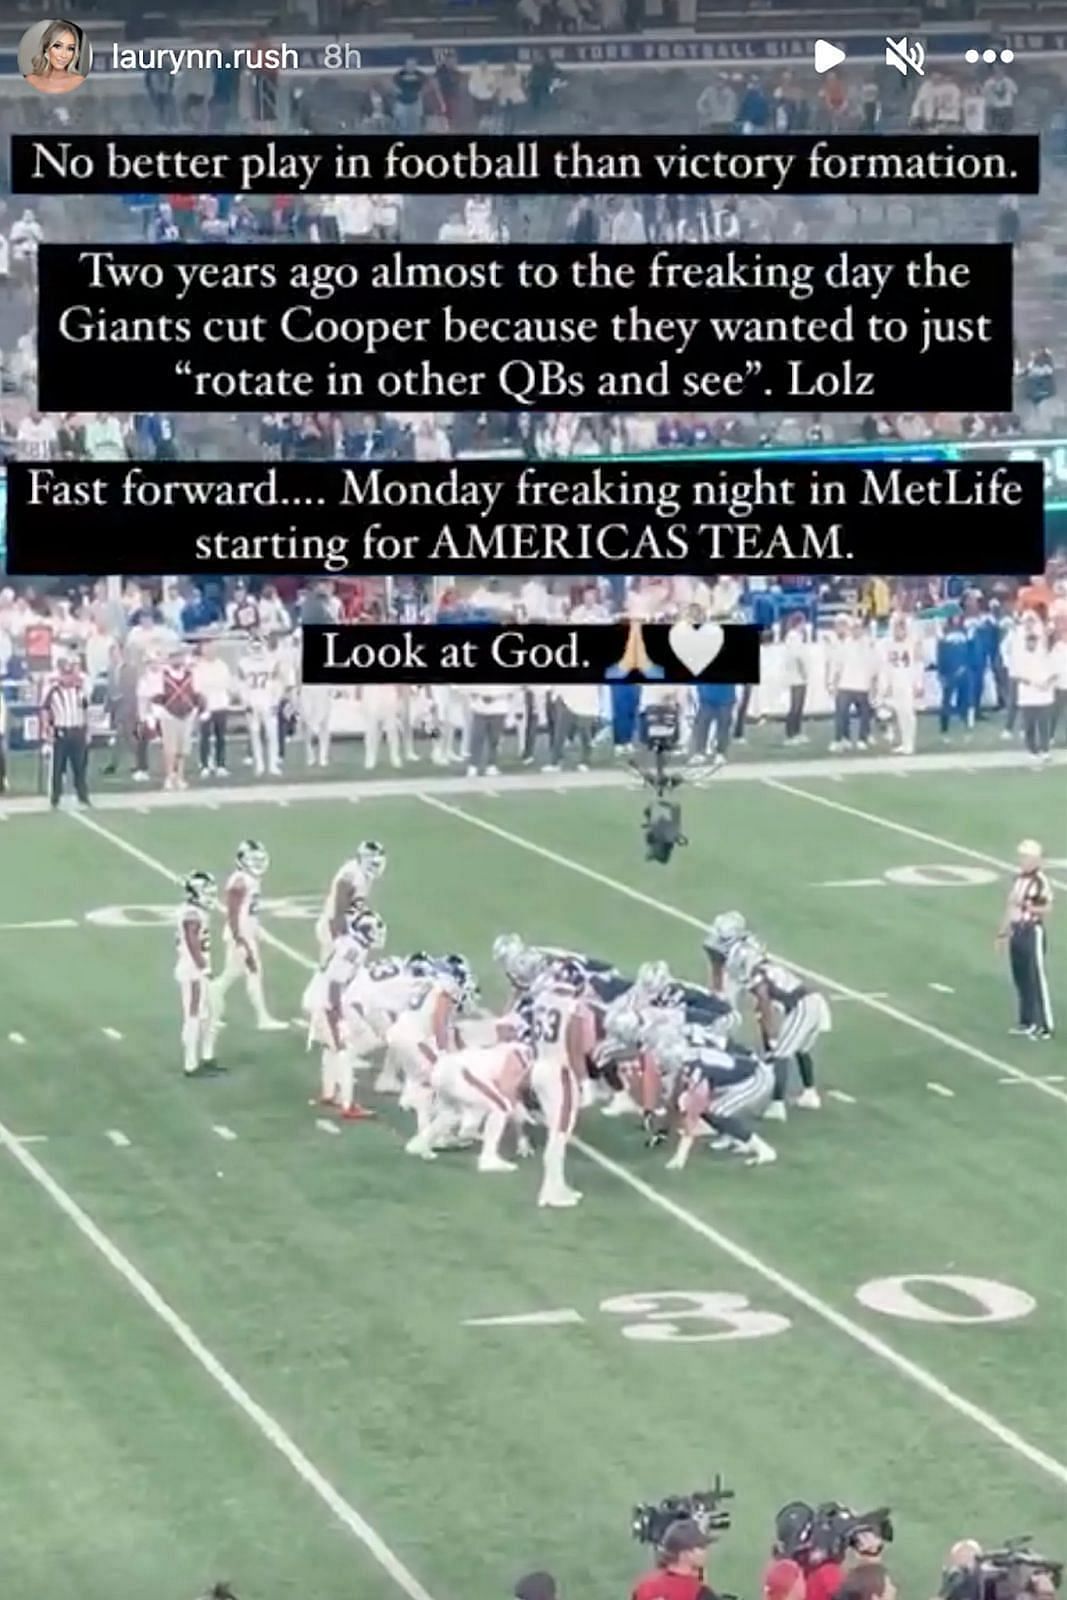 Lauryn Rush&rsquo;s Instagram Post taking a dig at the Giants